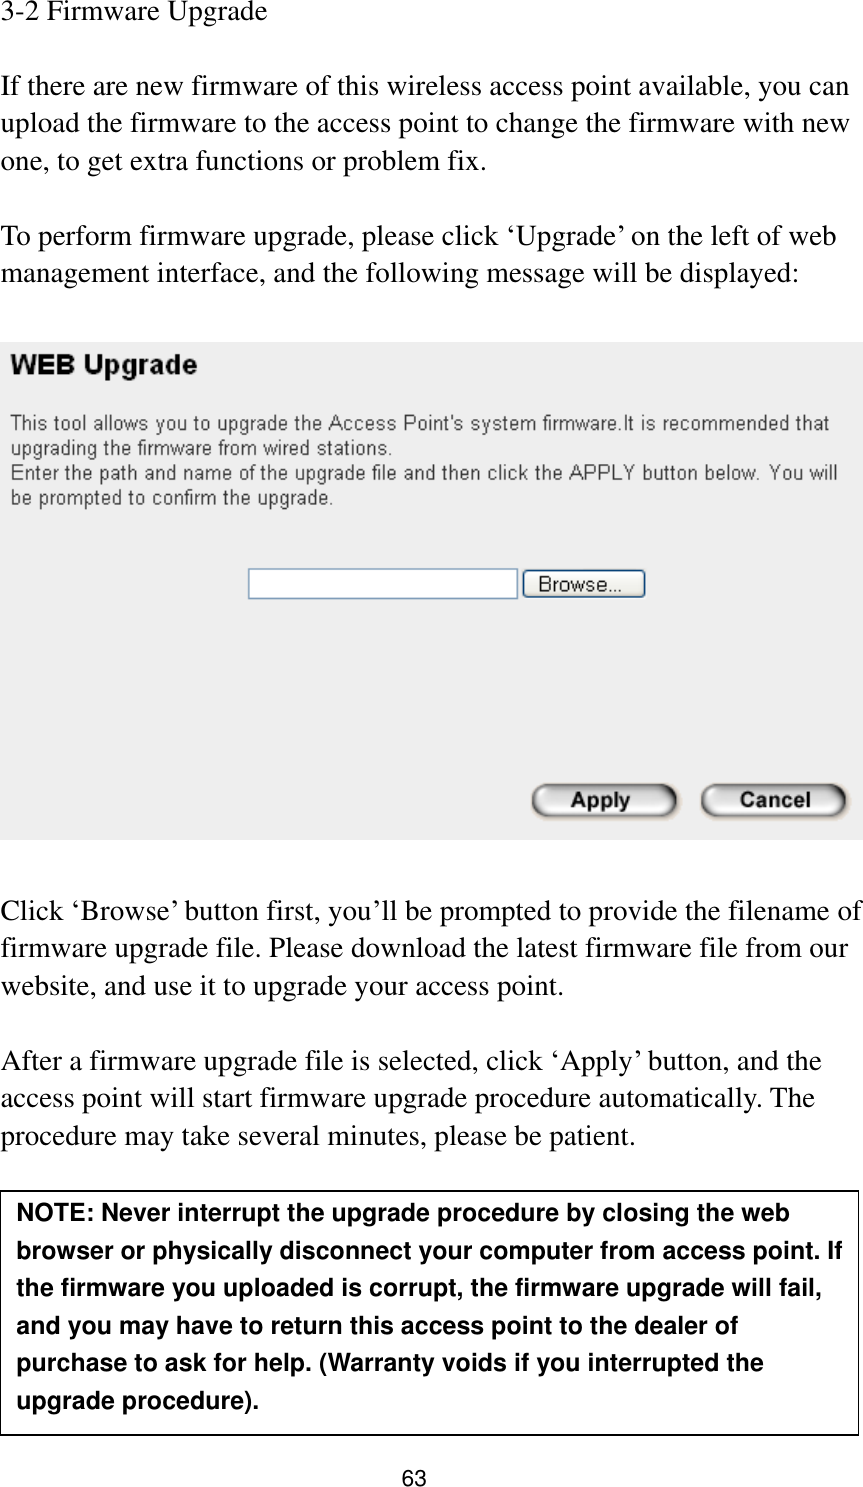 63 3-2 Firmware Upgrade  If there are new firmware of this wireless access point available, you can upload the firmware to the access point to change the firmware with new one, to get extra functions or problem fix.  To perform firmware upgrade, please click „Upgrade‟ on the left of web management interface, and the following message will be displayed:    Click „Browse‟ button first, you‟ll be prompted to provide the filename of firmware upgrade file. Please download the latest firmware file from our website, and use it to upgrade your access point.    After a firmware upgrade file is selected, click „Apply‟ button, and the access point will start firmware upgrade procedure automatically. The procedure may take several minutes, please be patient.   NOTE: Never interrupt the upgrade procedure by closing the web browser or physically disconnect your computer from access point. If the firmware you uploaded is corrupt, the firmware upgrade will fail, and you may have to return this access point to the dealer of purchase to ask for help. (Warranty voids if you interrupted the upgrade procedure).   